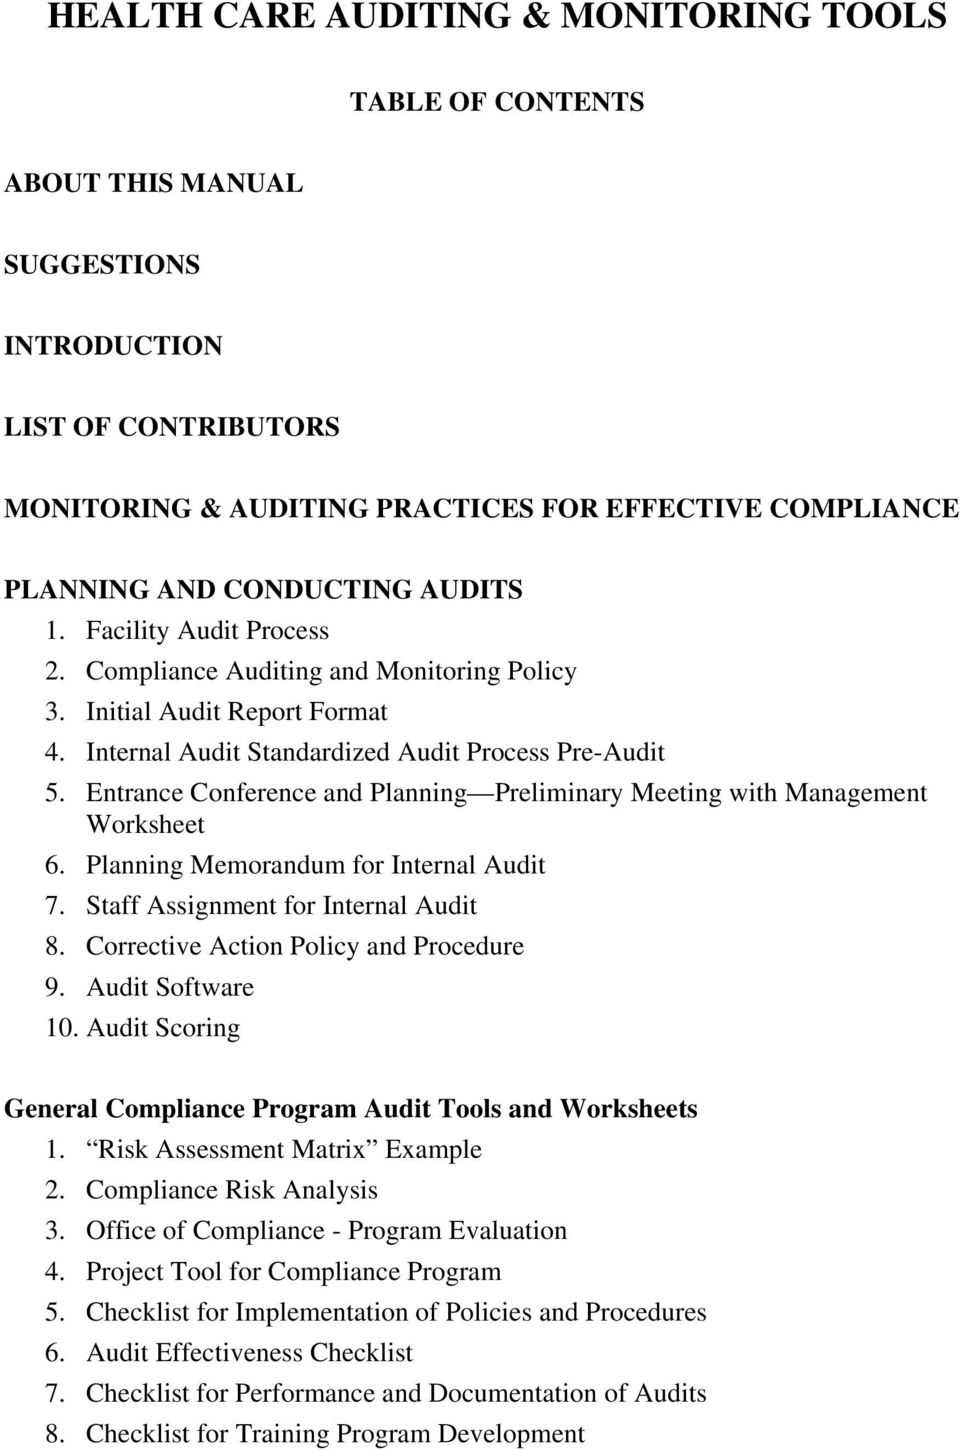 Health Care Auditing & Monitoring Tools – Pdf Free Download Within Compliance Monitoring Report Template